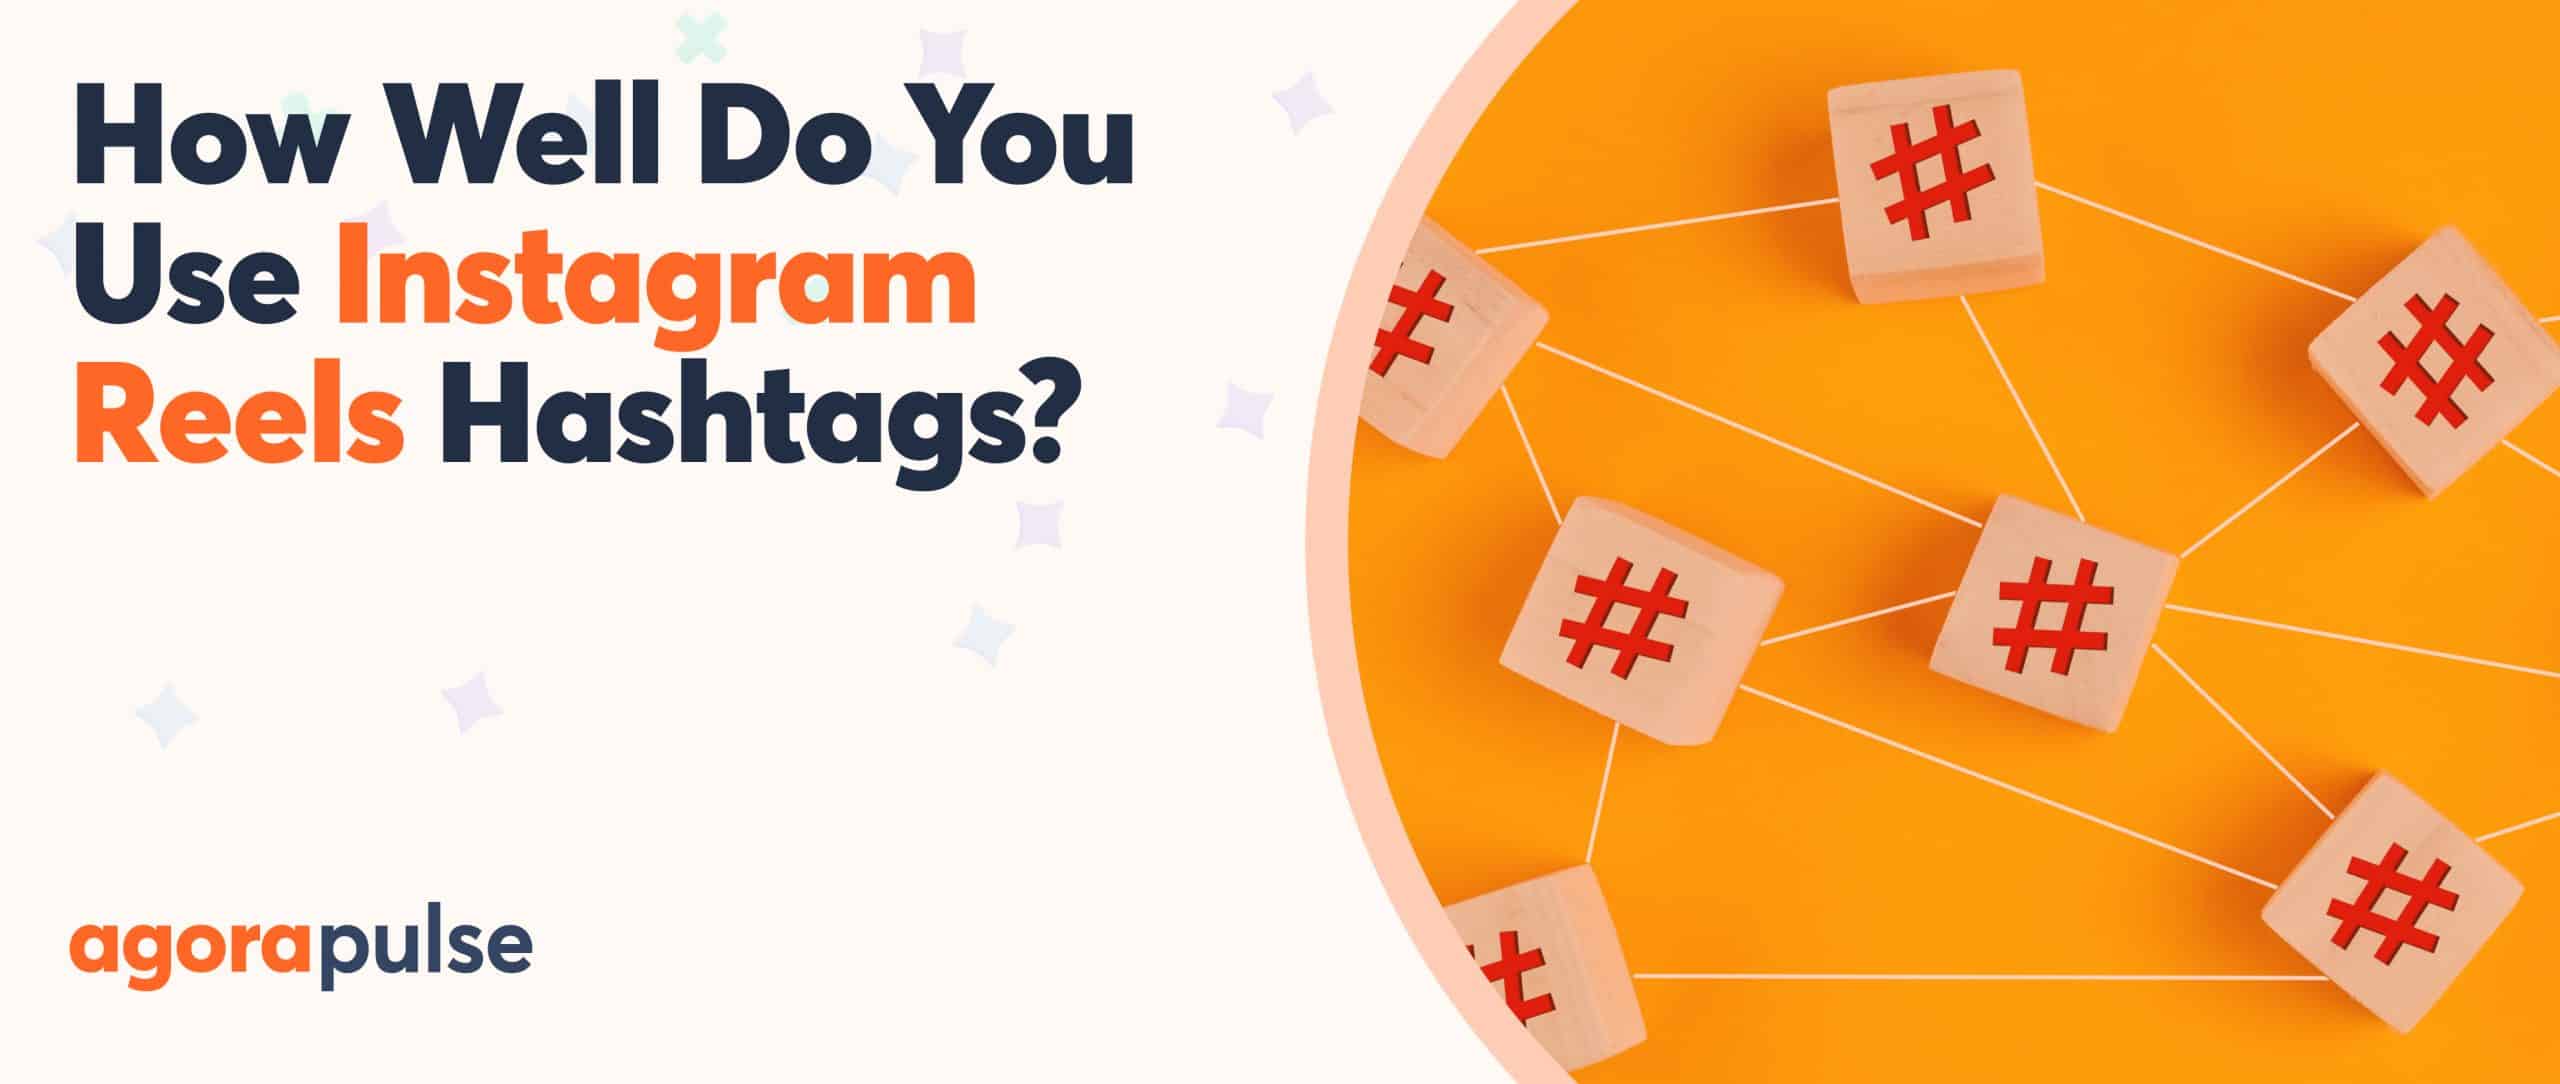 Feature image of Get Strategic With Instagram Reels Hashtags!